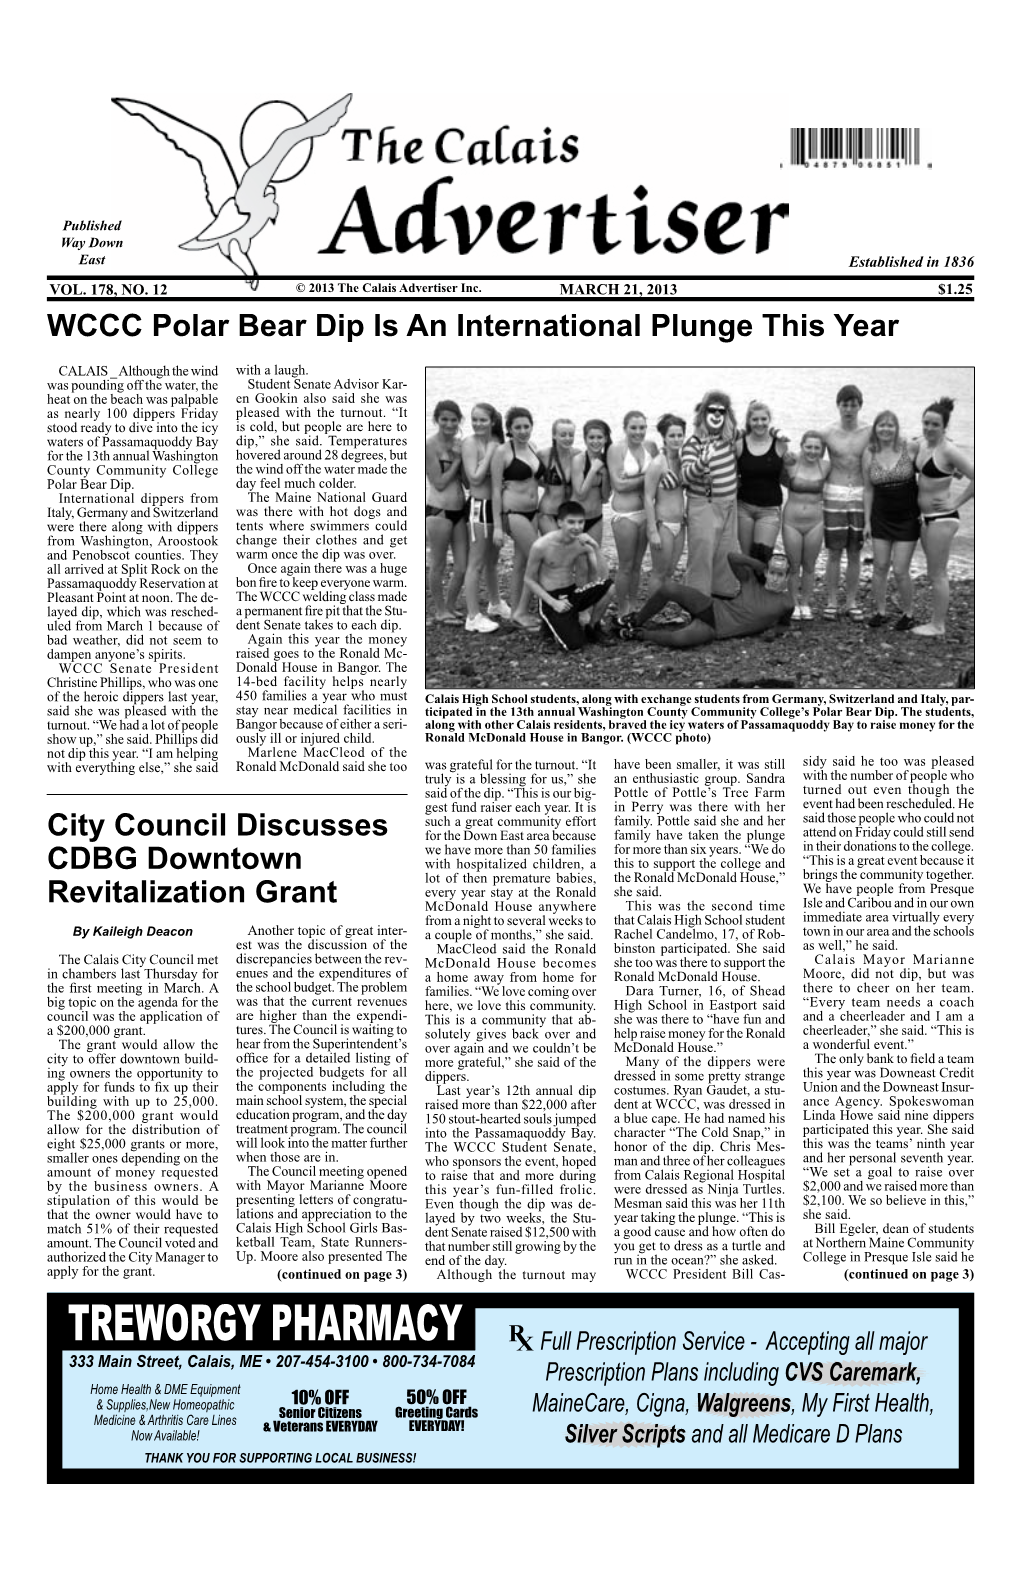 WCCC Polar Bear Dip Is an International Plunge This Year City